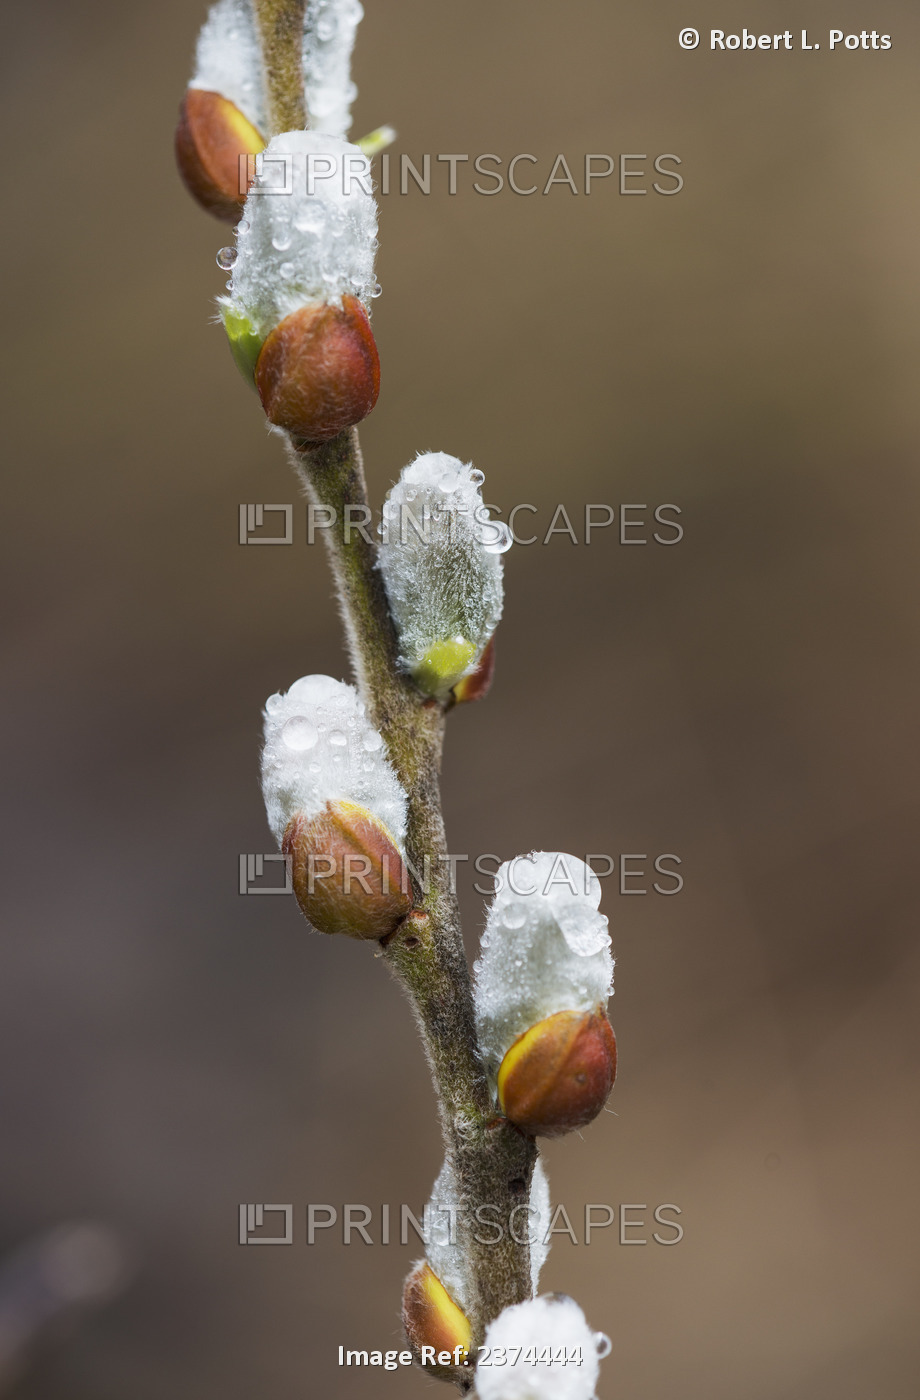 Fuzzy Willow Catkins Come Out In The Spring; Astoria, Oregon, United States Of ...